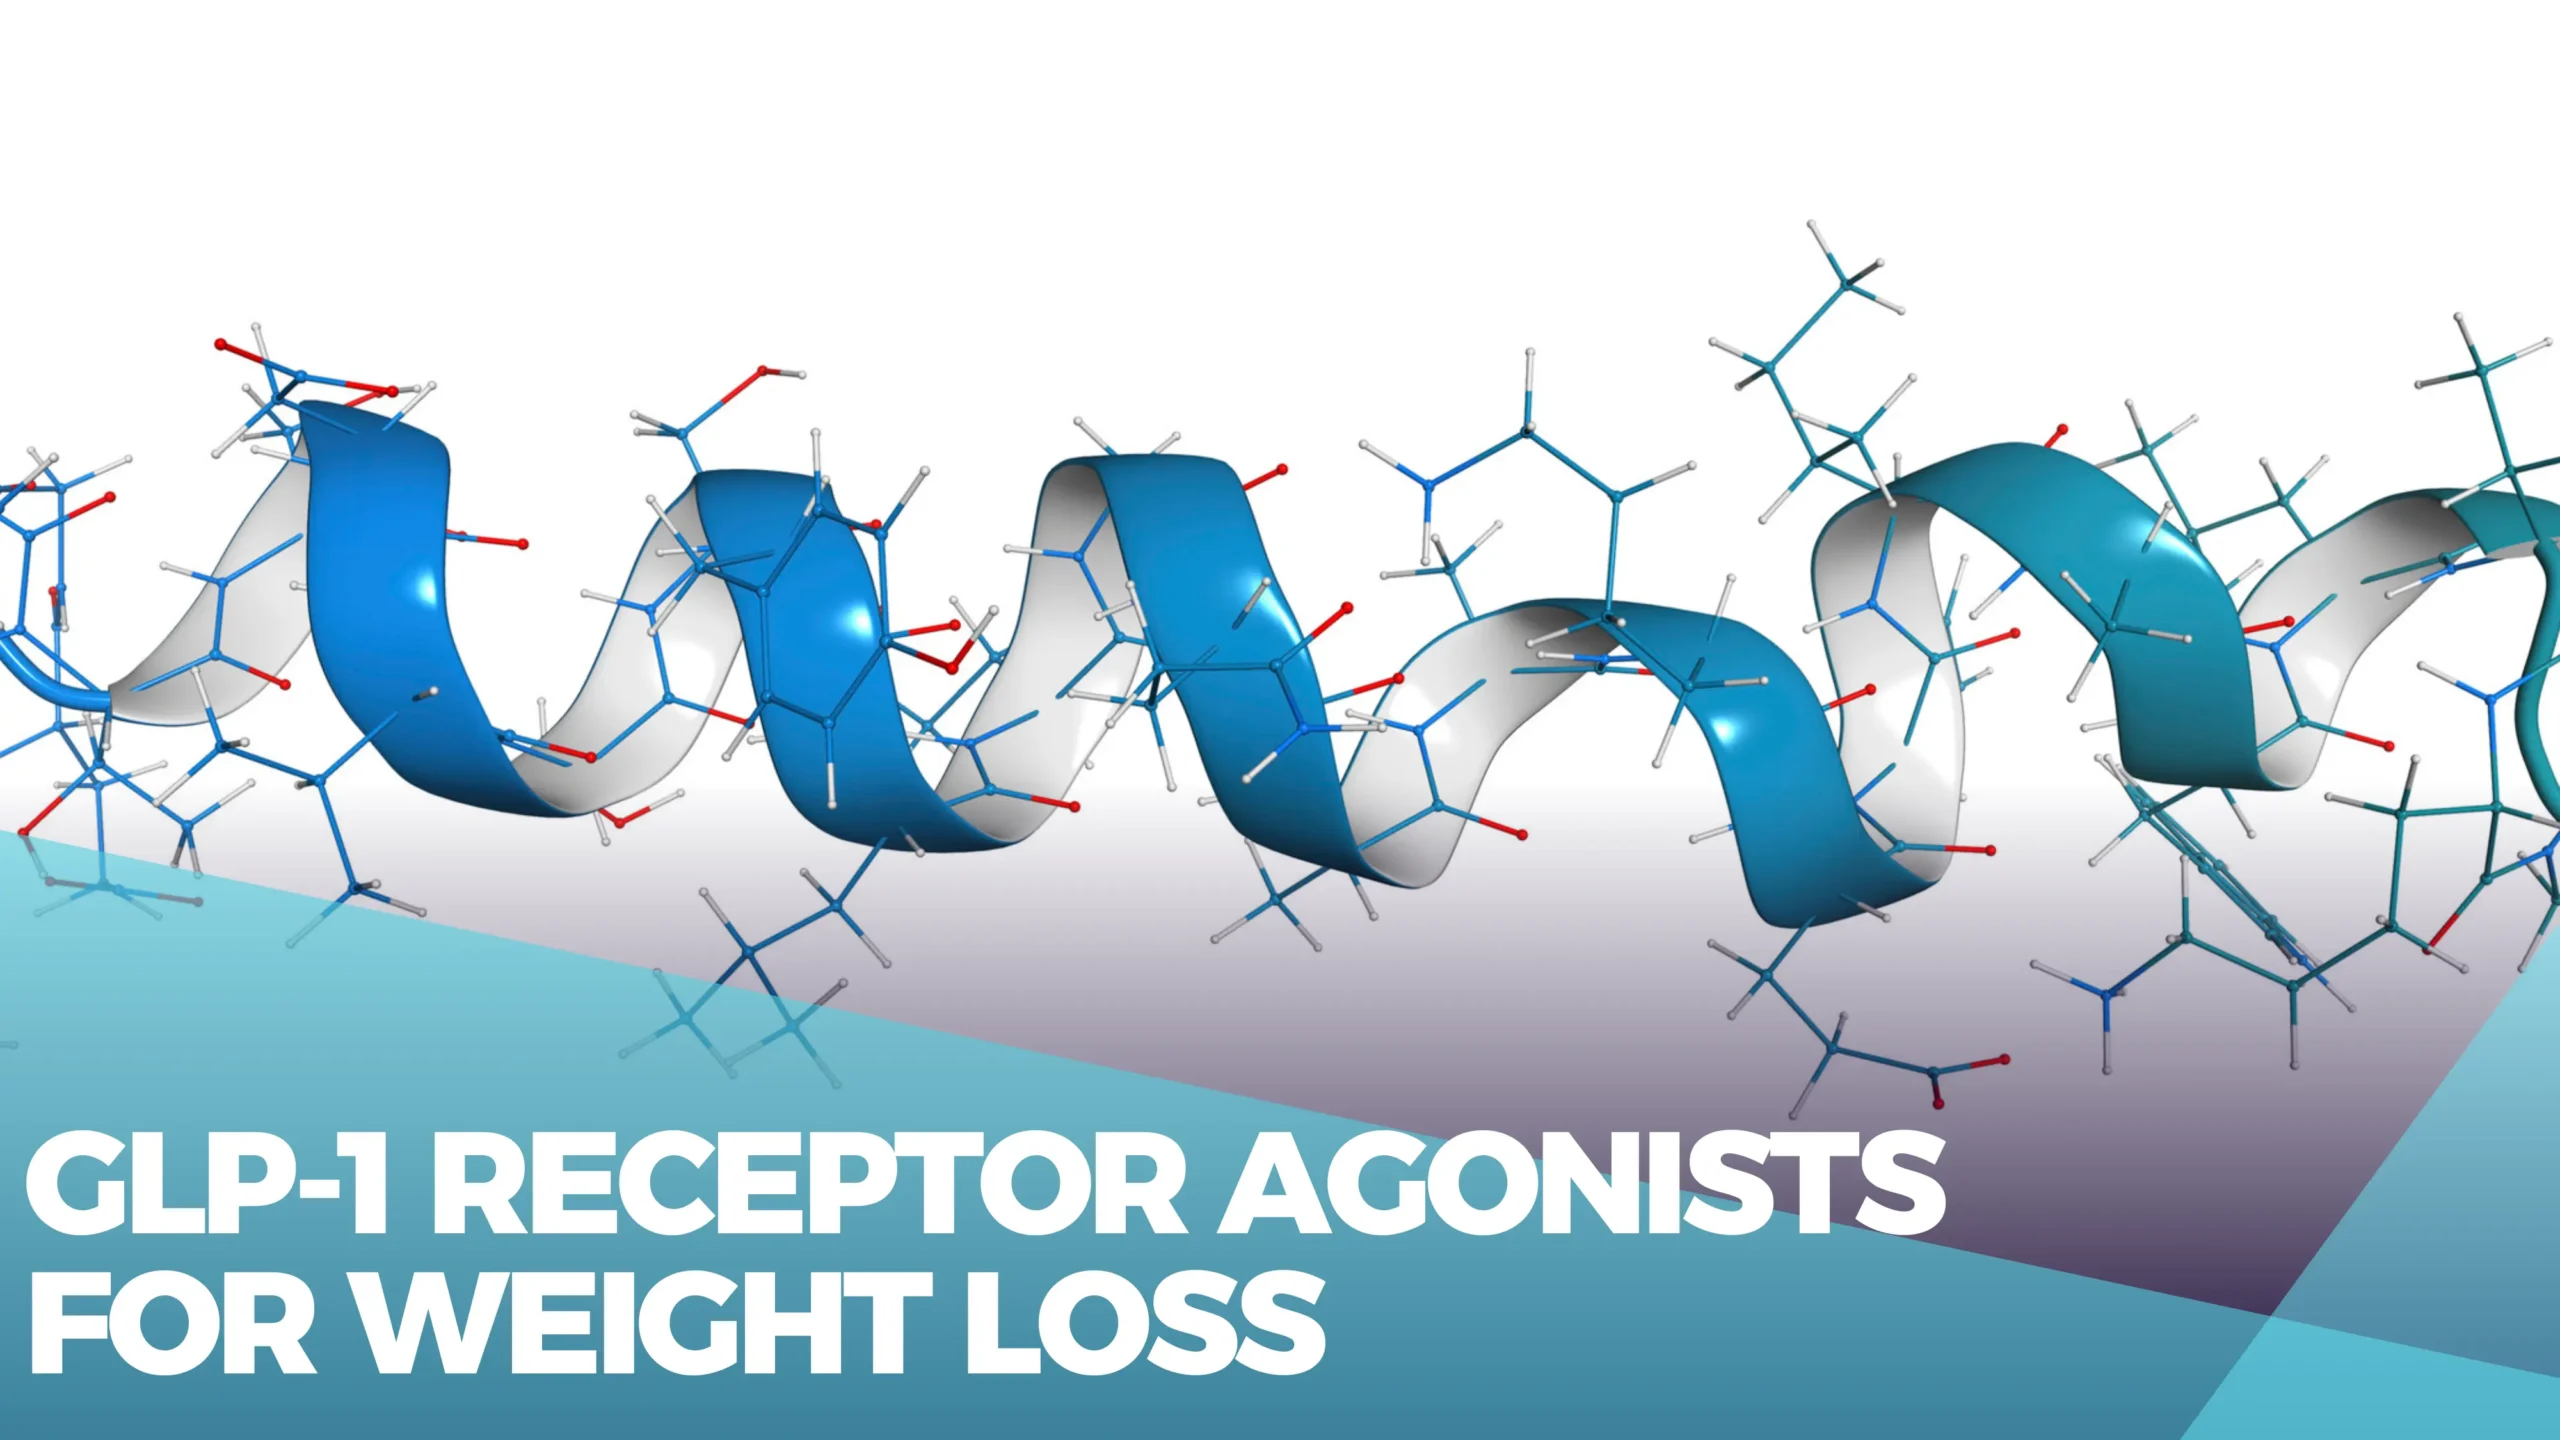 GLP-1 Receptor Agonists for Weight Loss - A Comprehensive Review